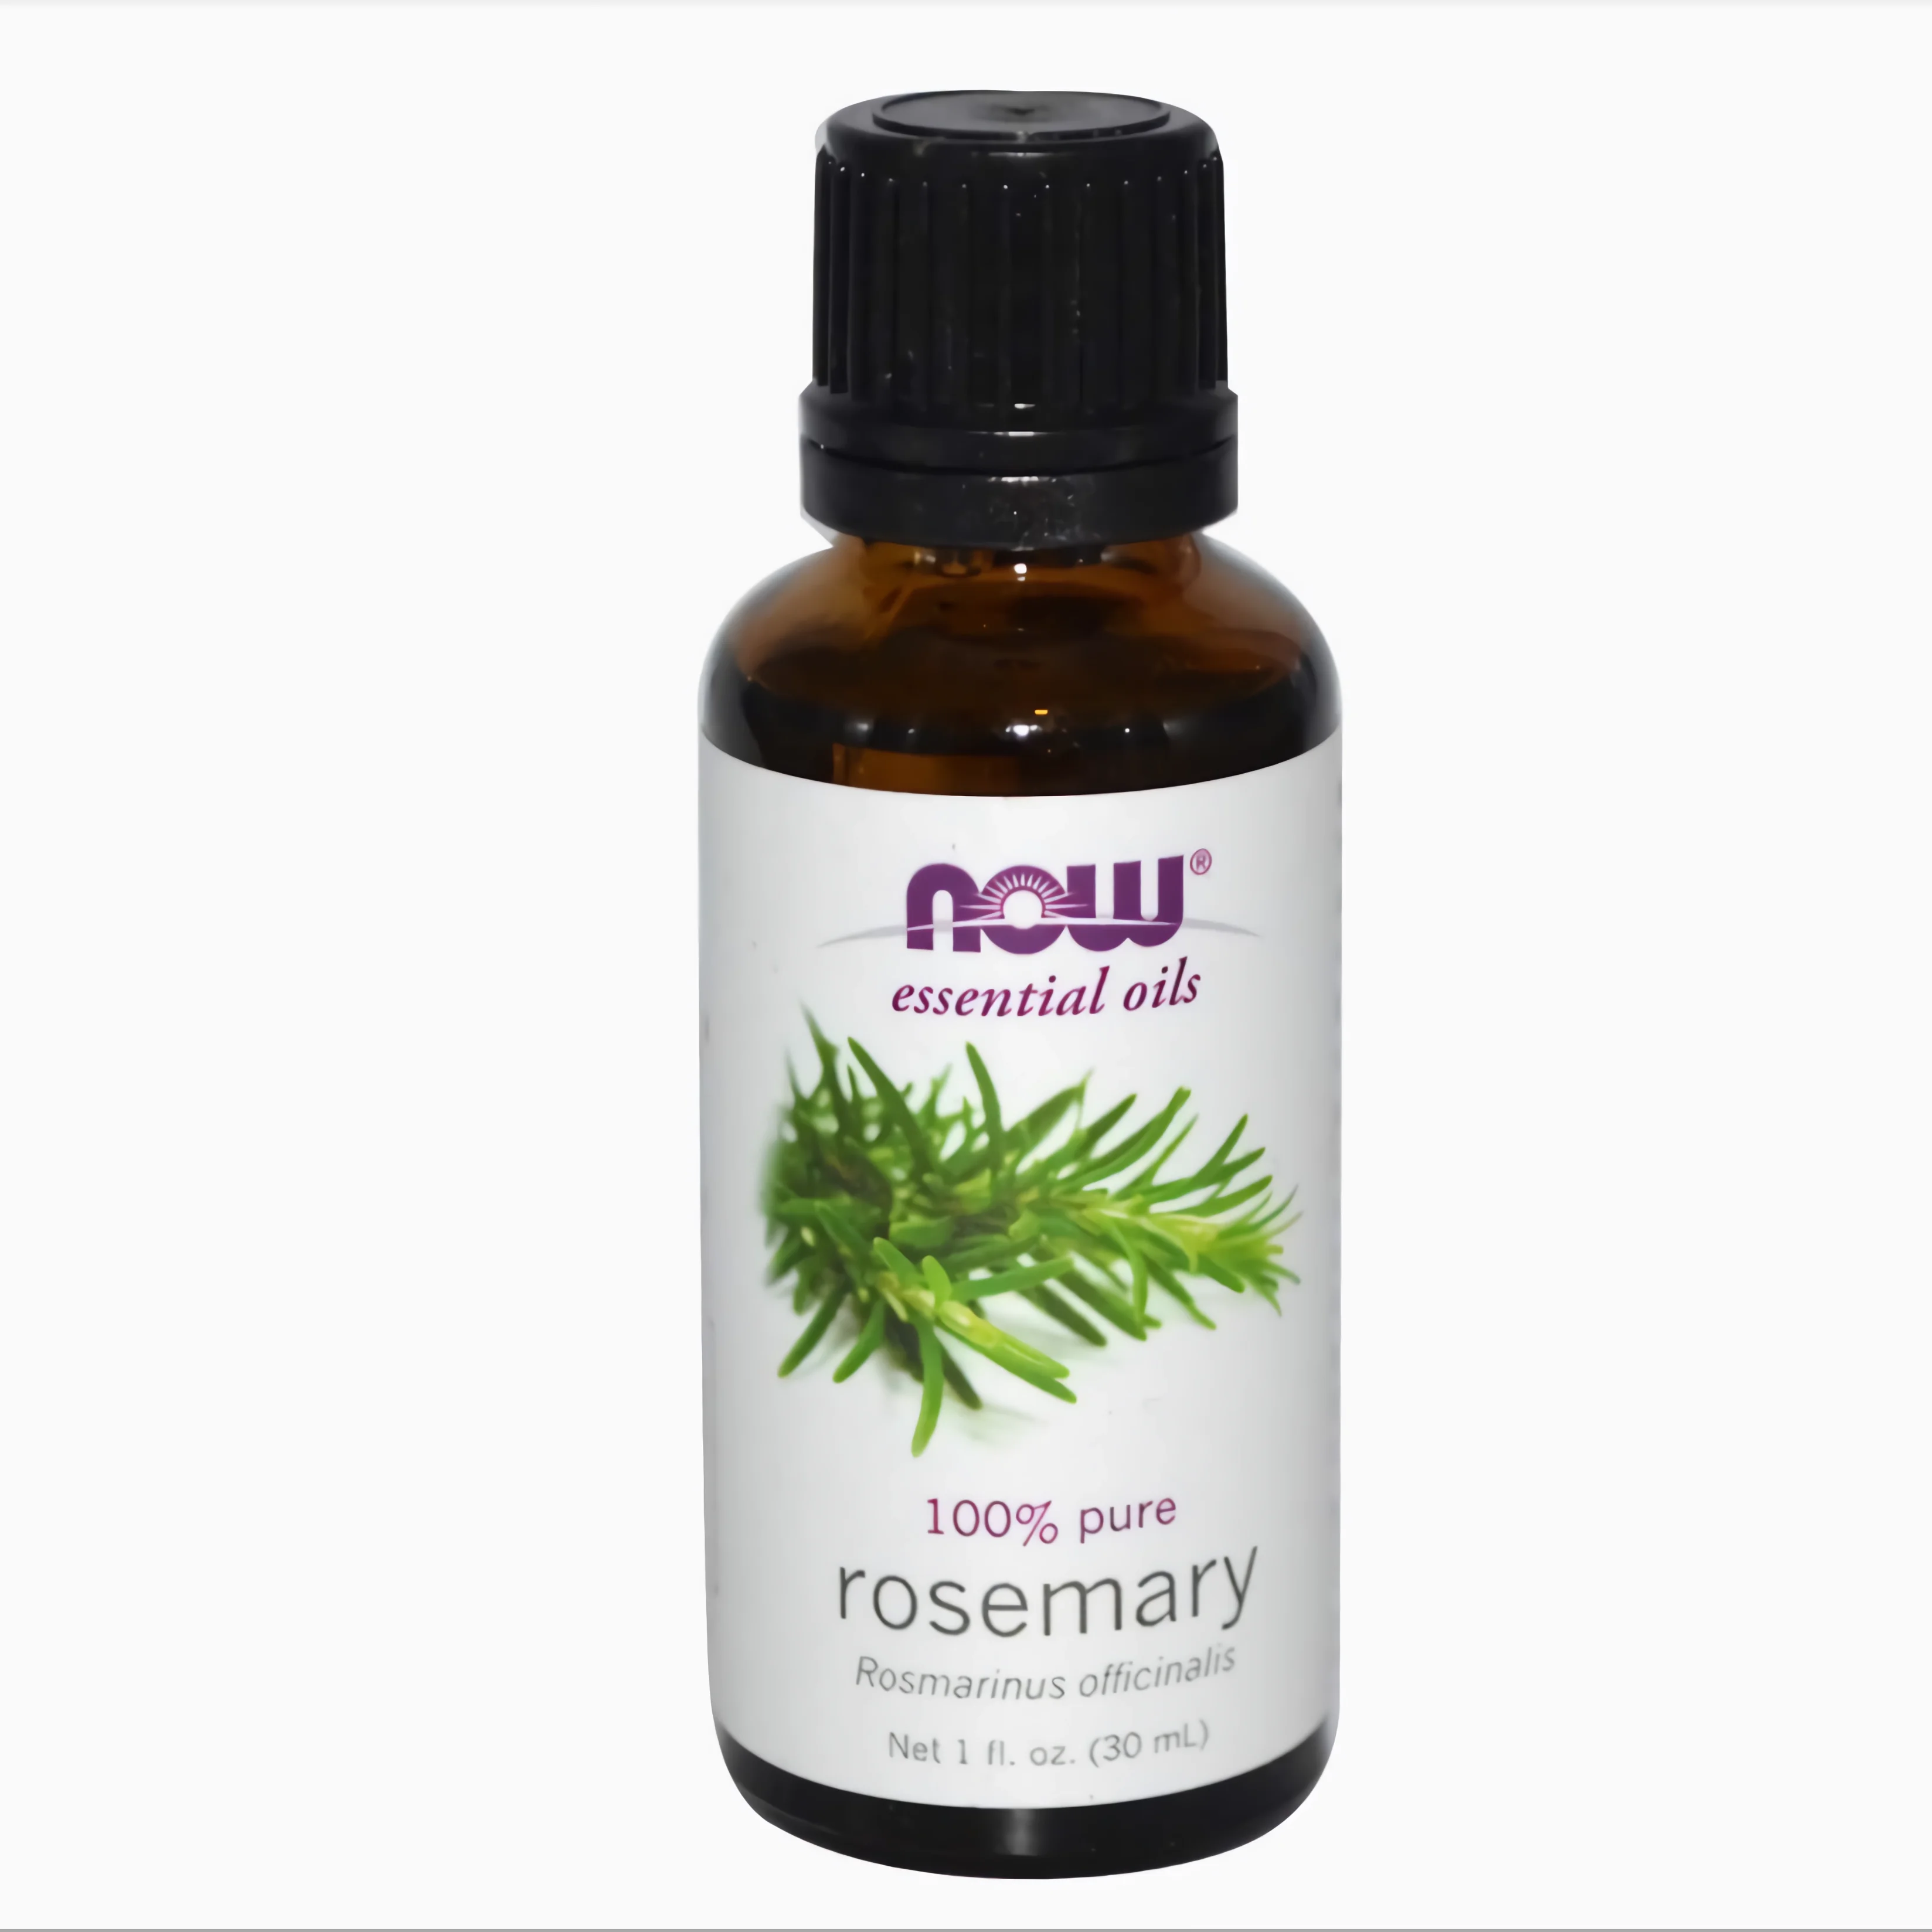 

Rosemary Care/Growth Oil/Prevent Thinning/Postpartum Aloe Saw Palmetto/NOW Foods, Essential Oils, Rosemary, 1 fl oz (30 ml)